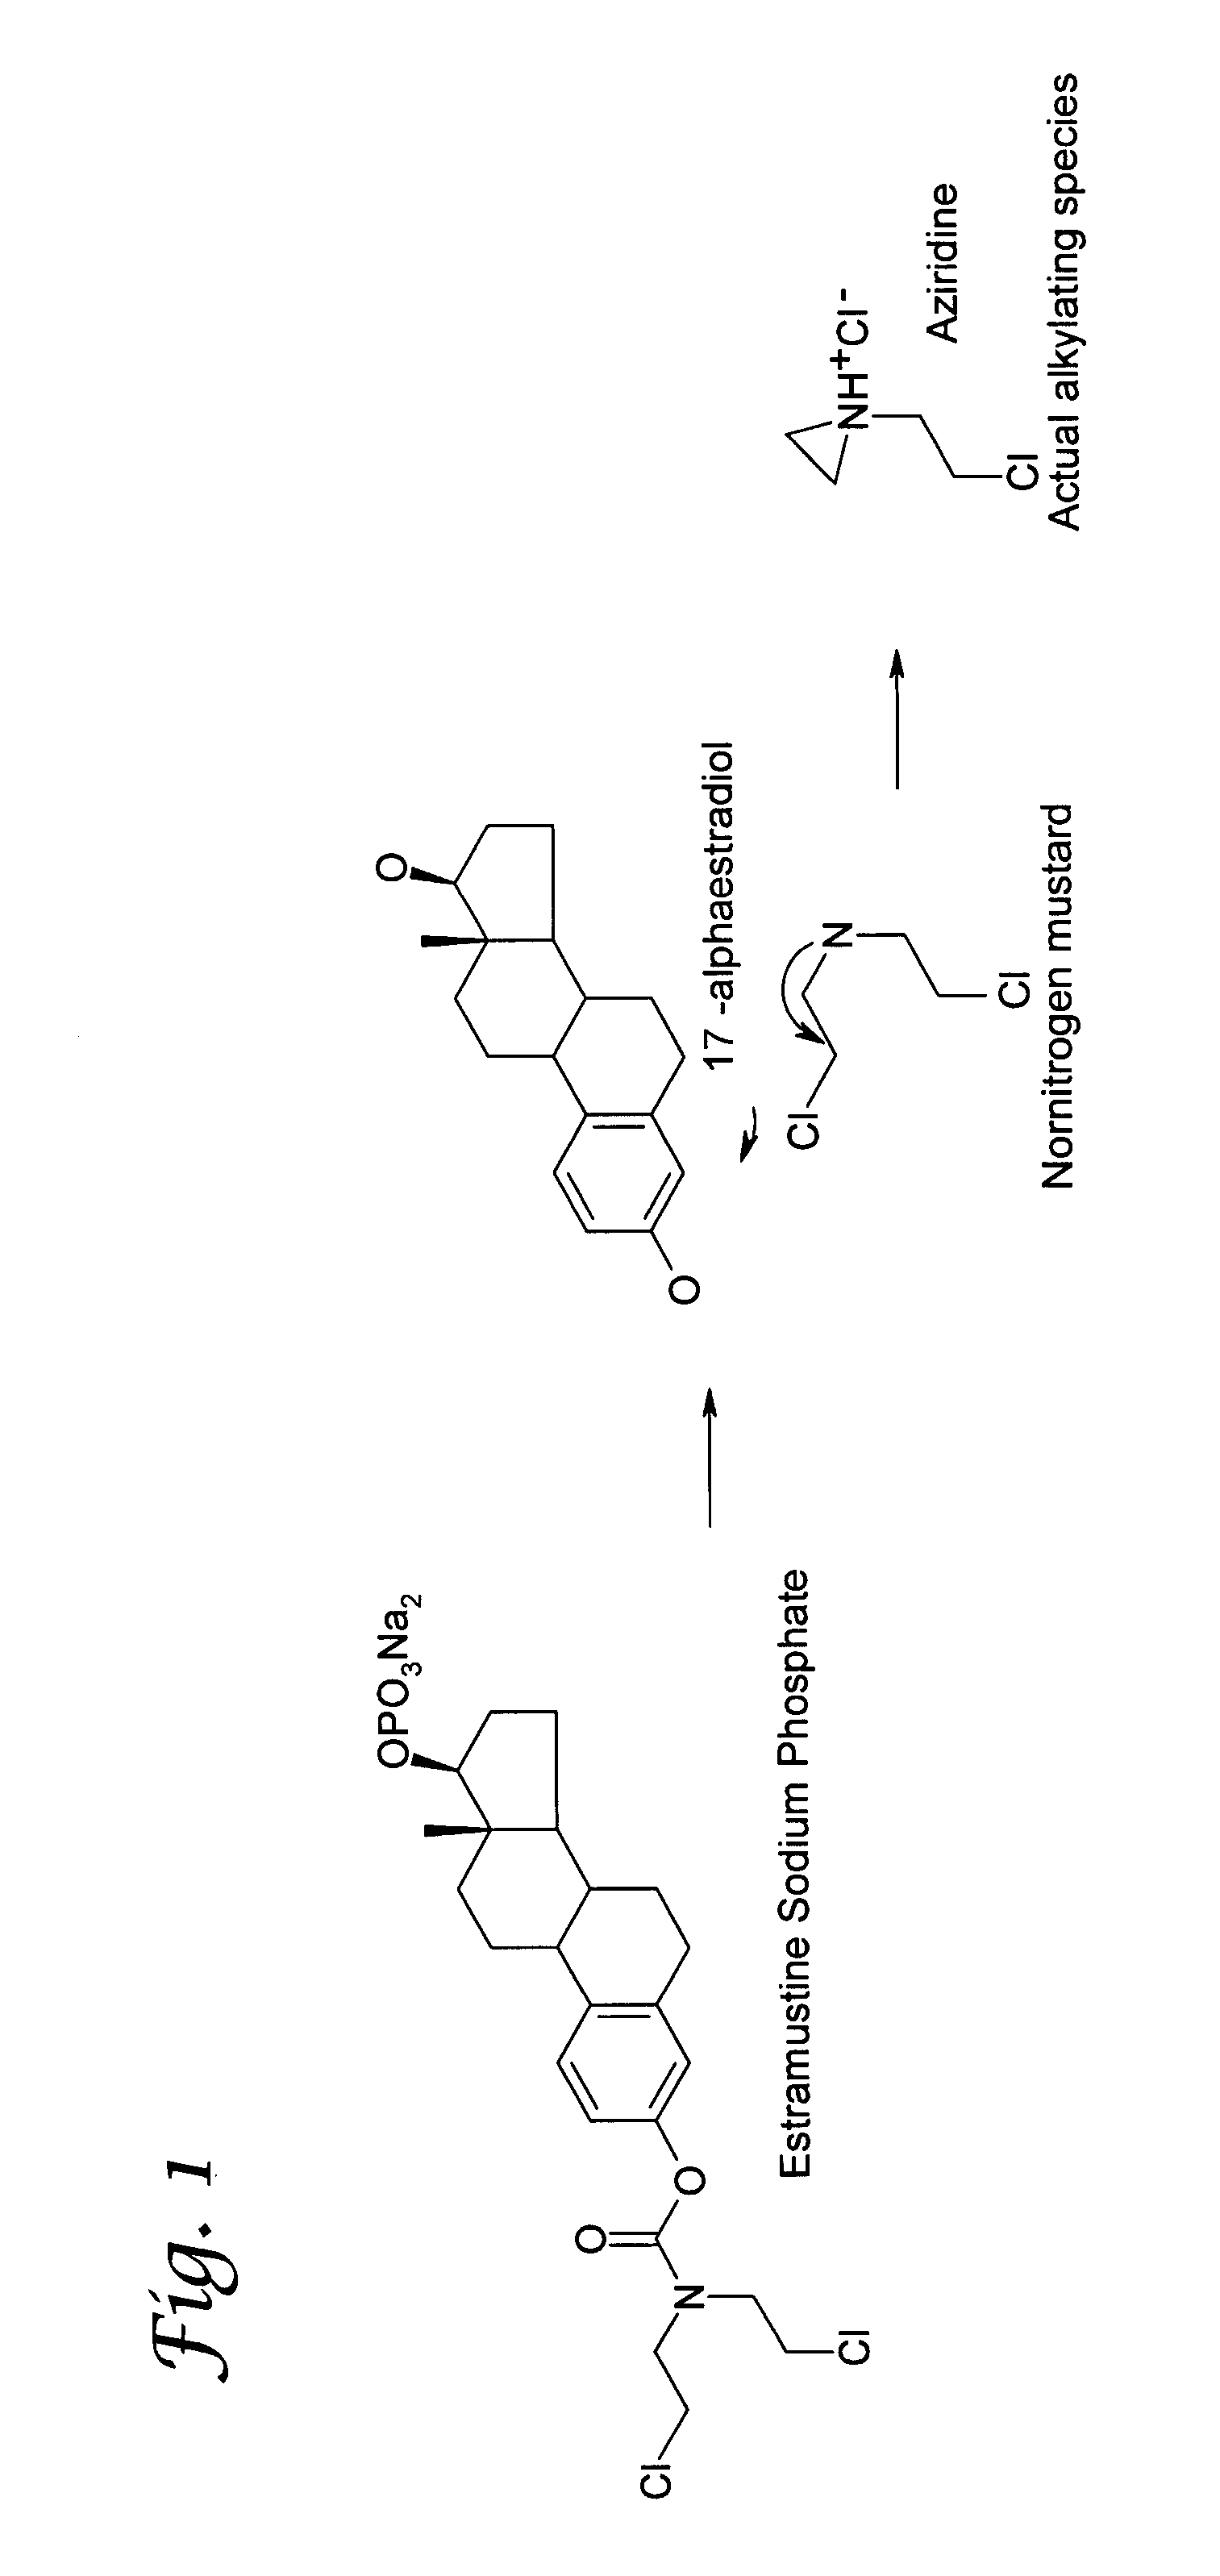 Glucosamine and Glucosamine/Anti-Inflammatory Mutual Prodrugs, Compositions, and Methods